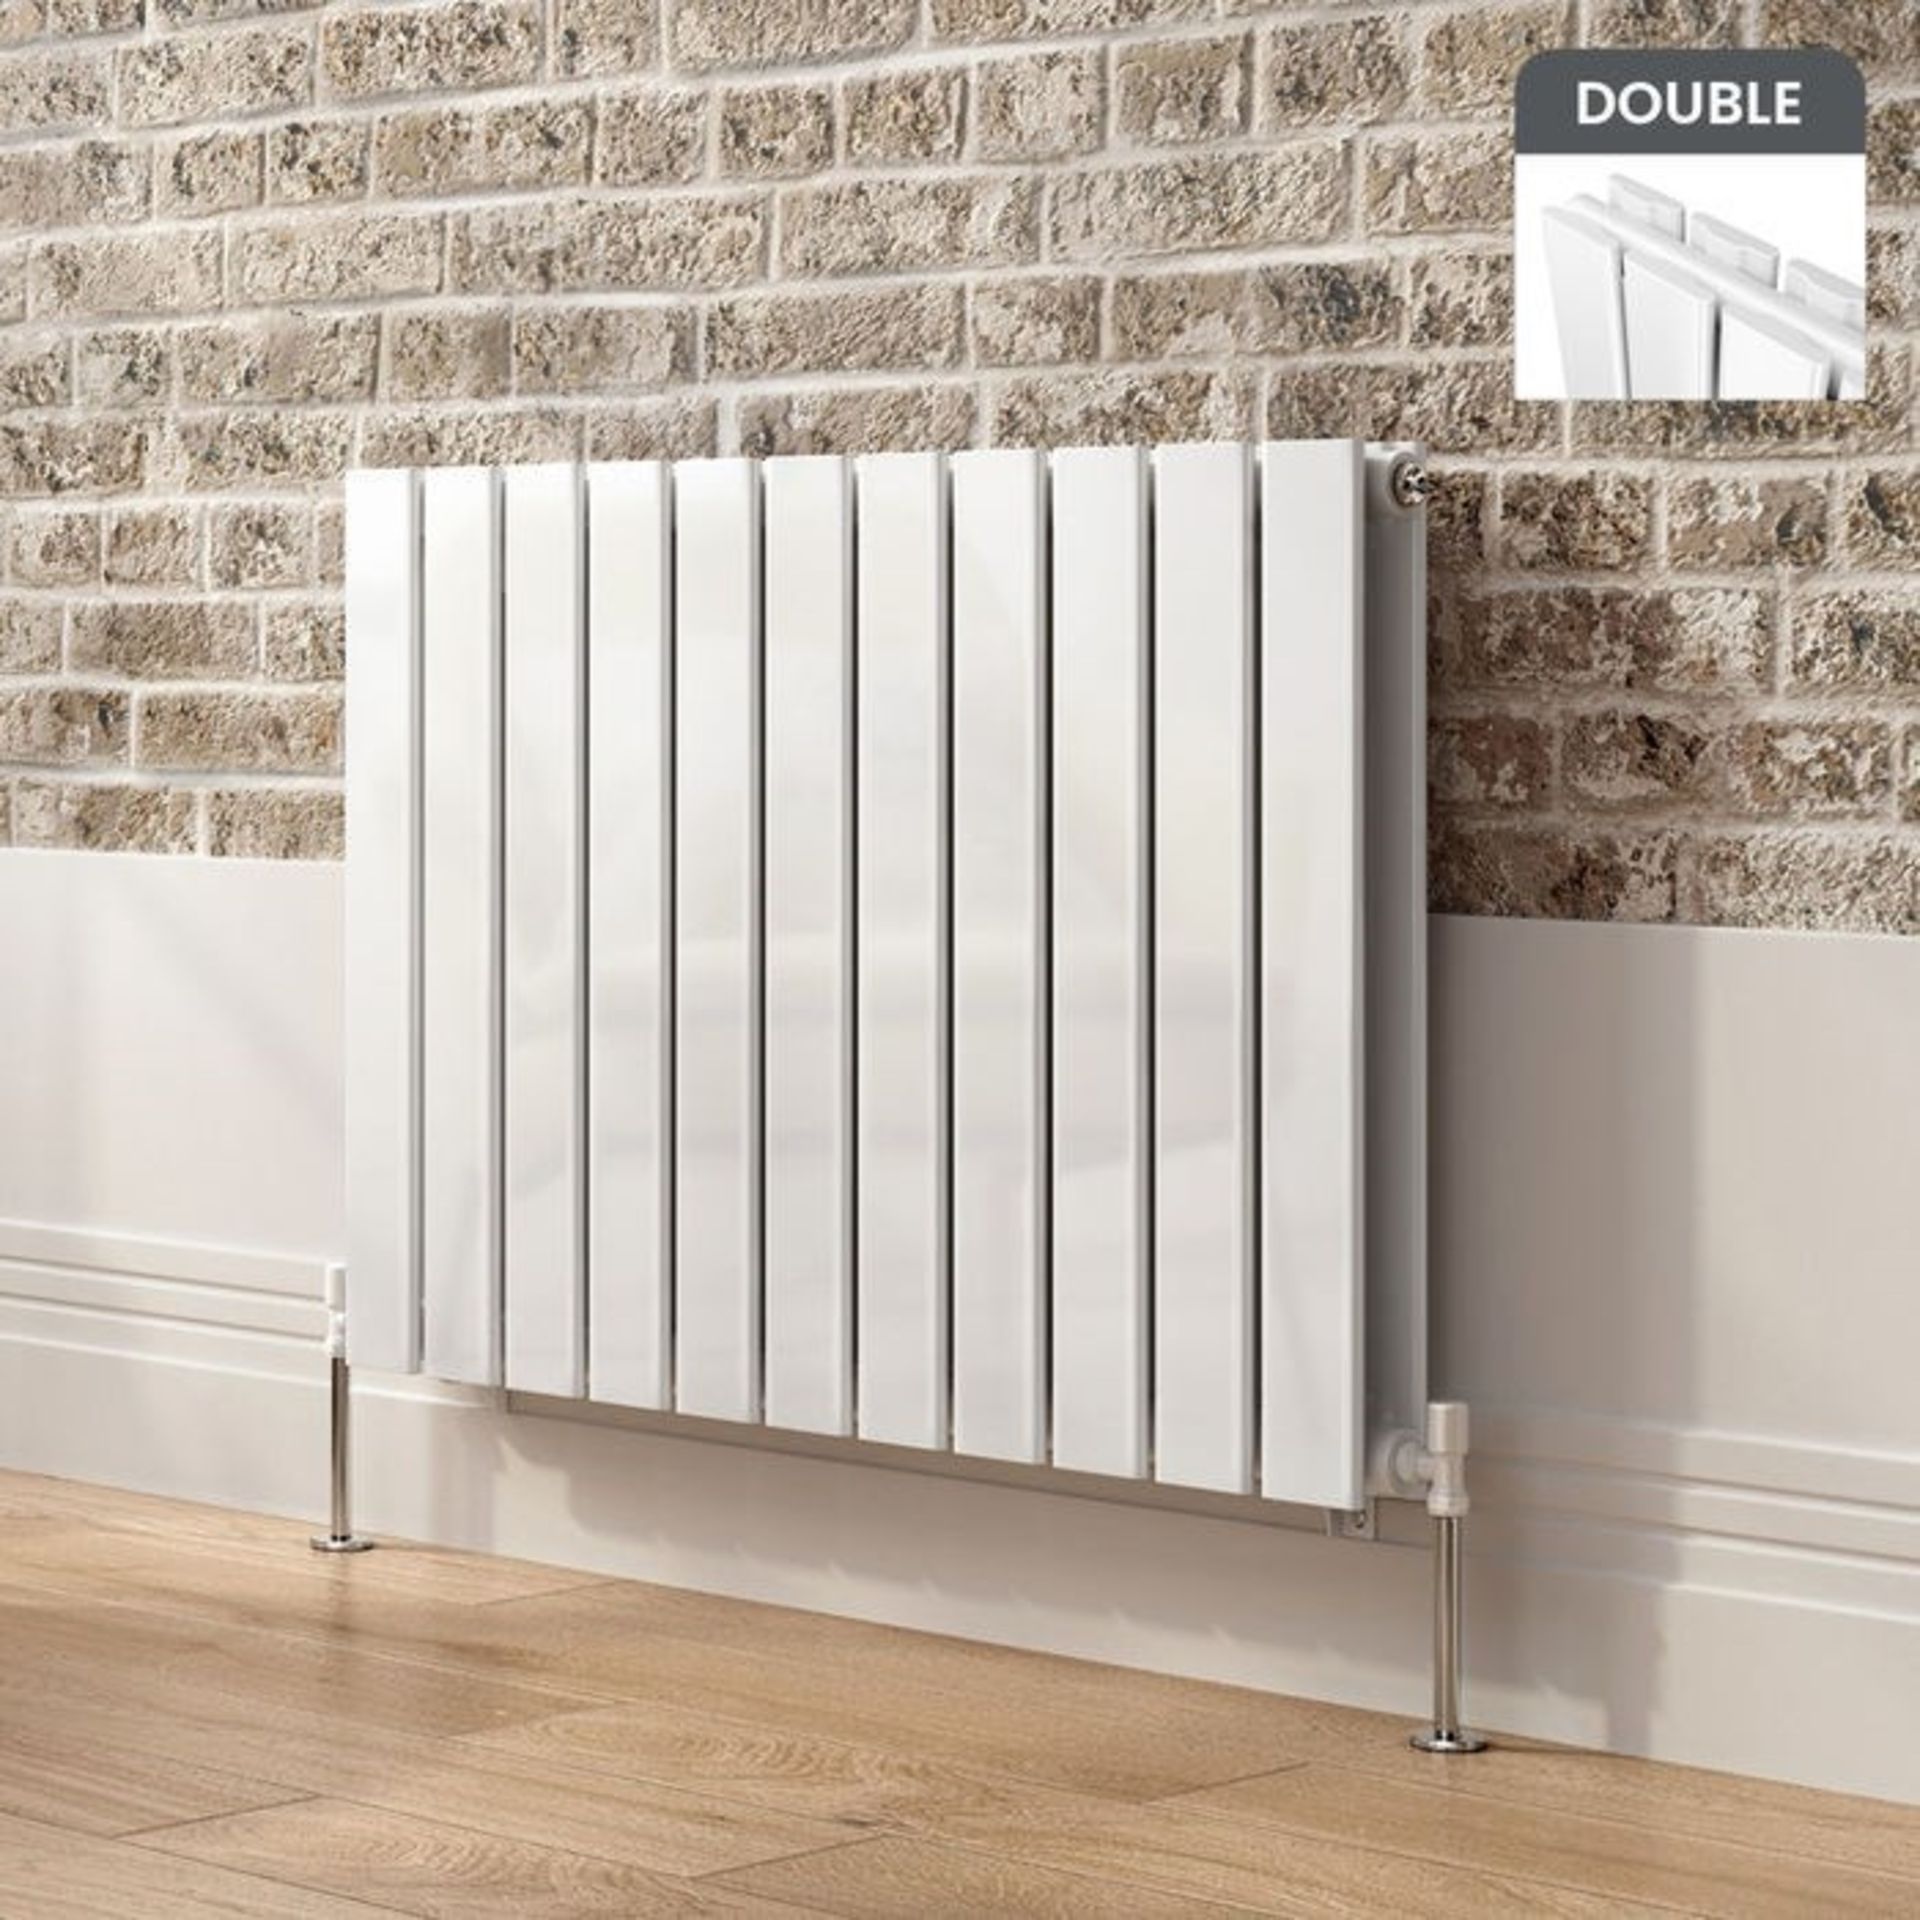 Brand New 600x830mm Gloss White Double Flat Panel Horizontal Radiator. RRP £474.99.RC221.Made with h - Image 3 of 3